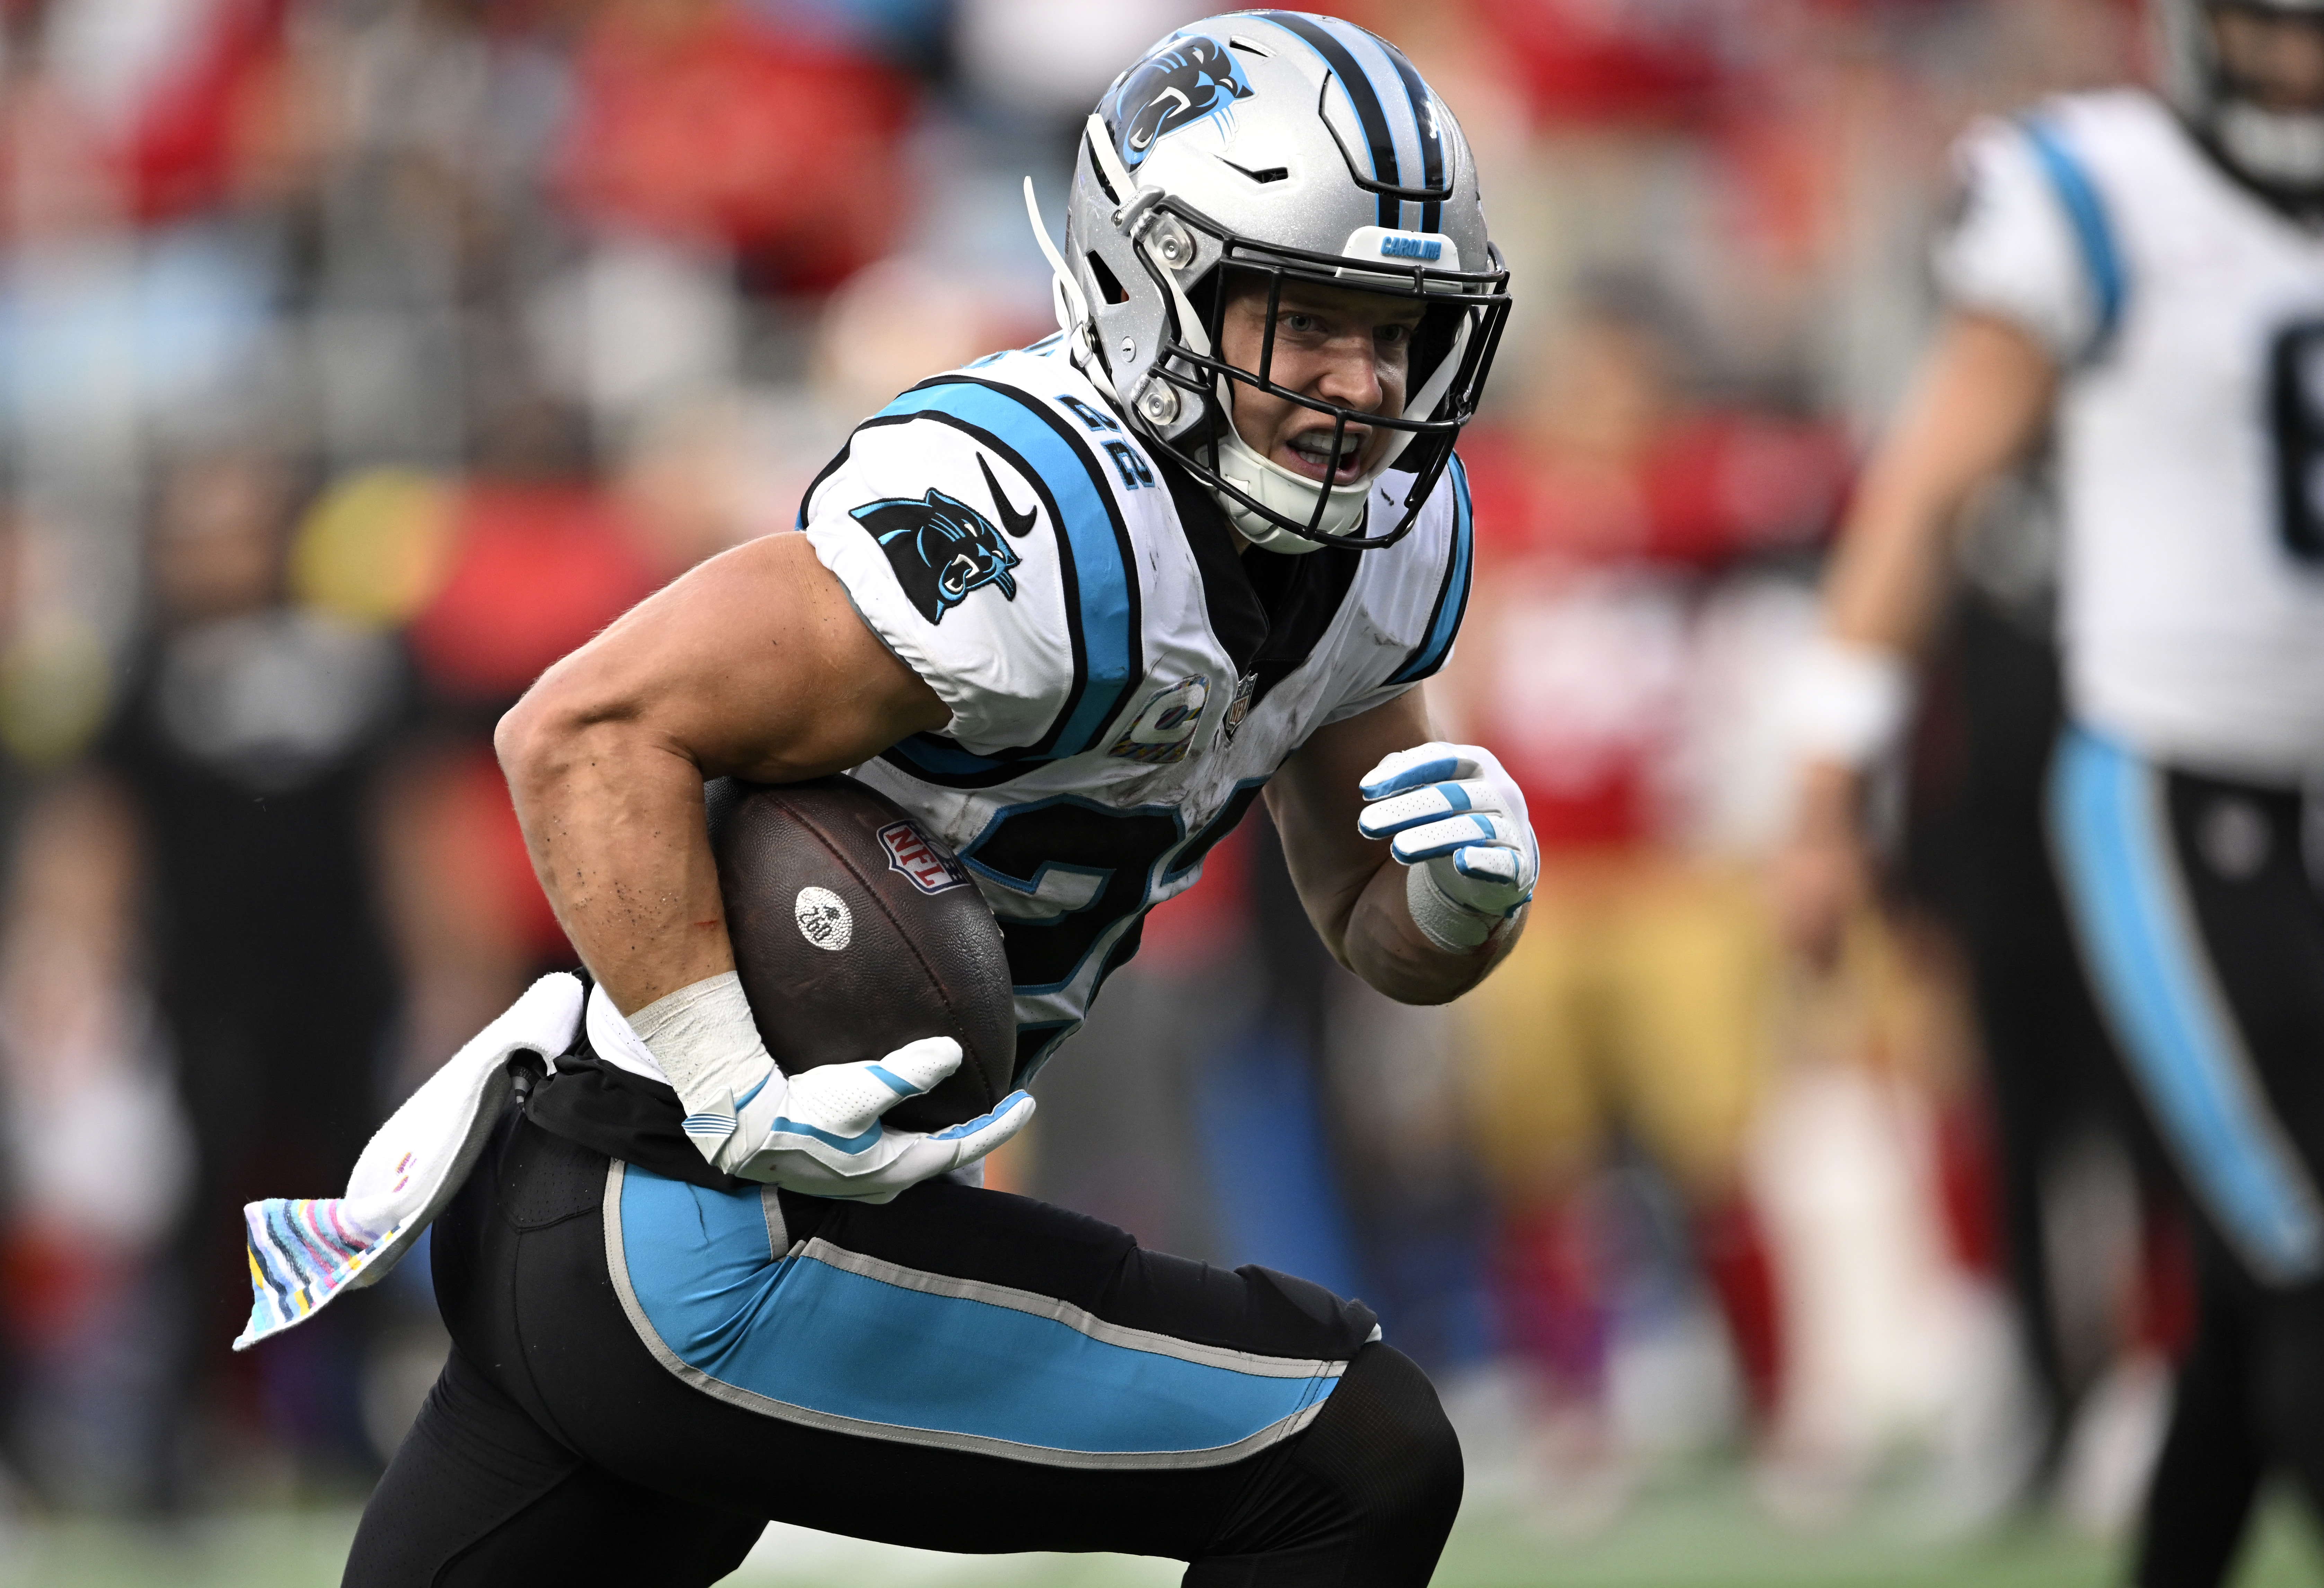 Carolina Panthers willing to listen to offers for star RB McCaffrey - CGTN